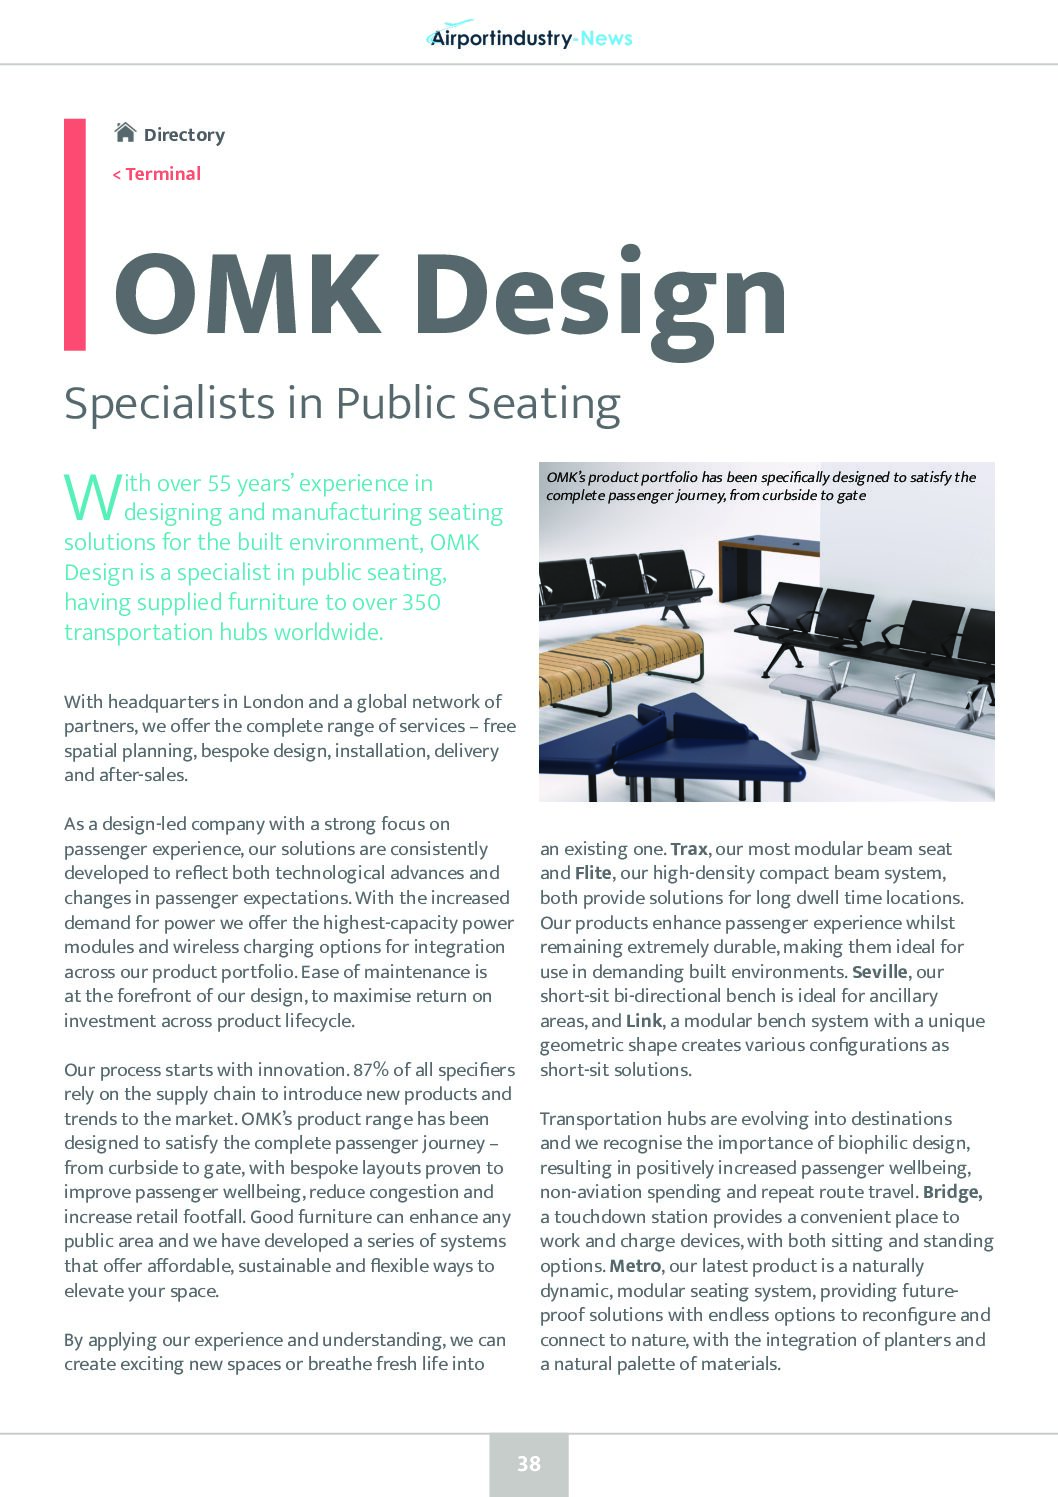 OMK Design: Specialists in Public Seating